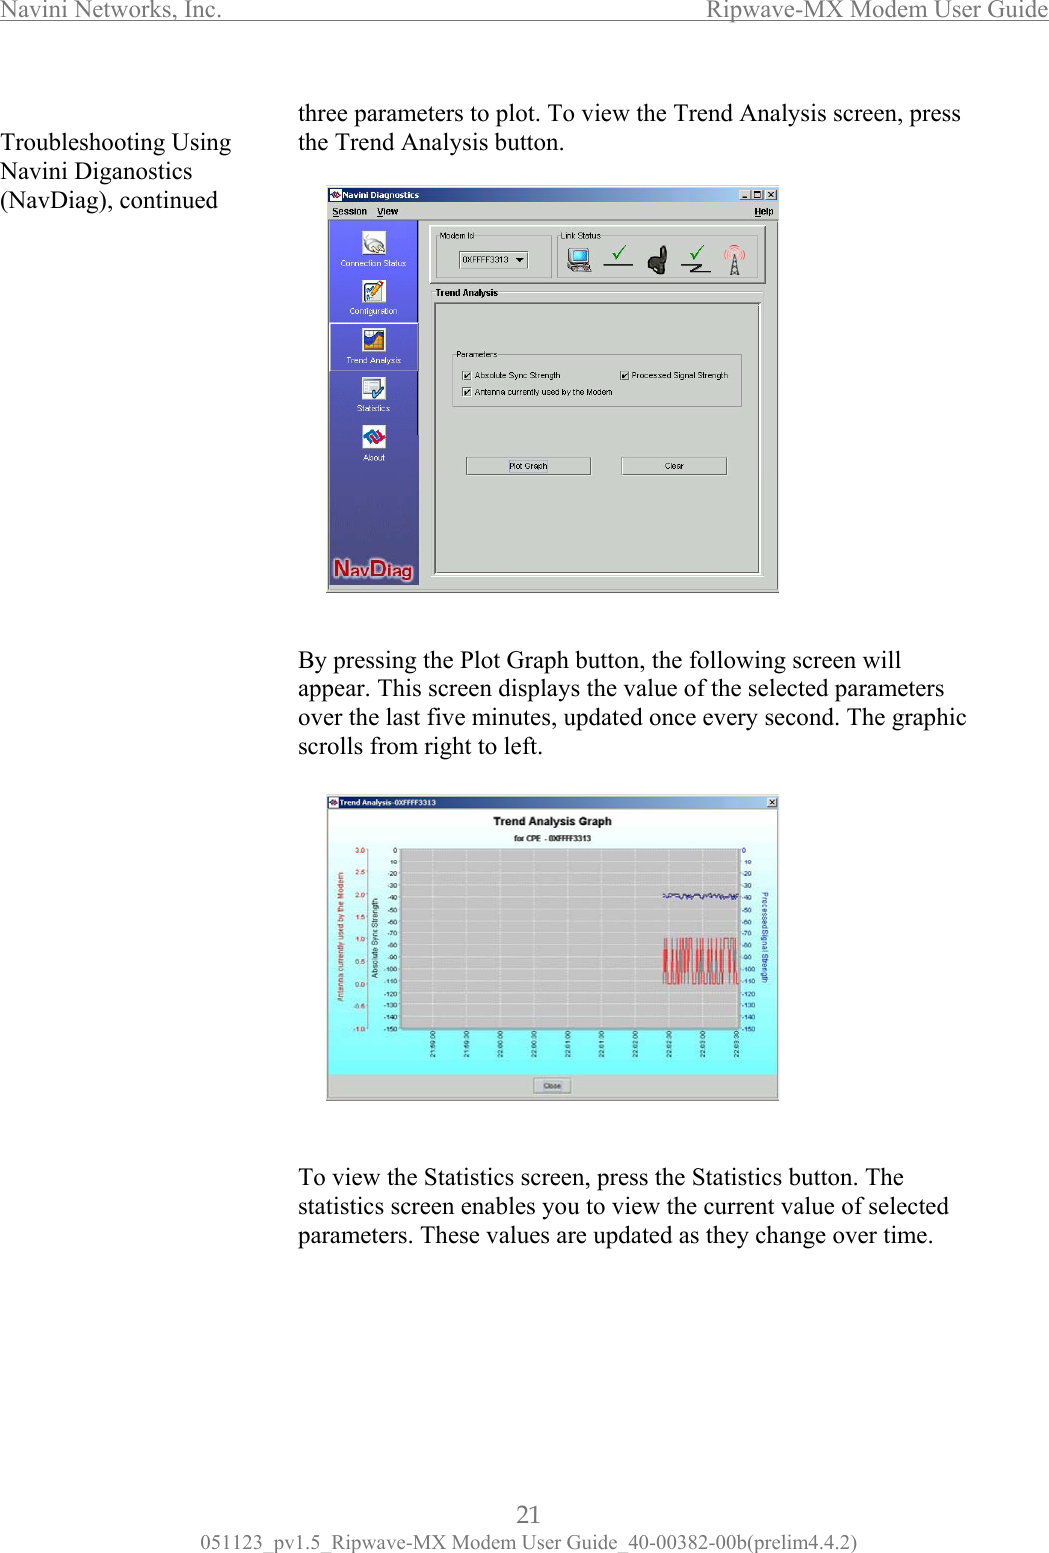 Navini Networks, Inc.                  Ripwave-MX Modem User Guide  Troubleshooting Using Navini Diganostics (NavDiag), continued                                           three parameters to plot. To view the Trend Analysis screen, press      y pressing the Plot Graph button, the following screen will ppear. This screen displays the value of the selected parameters ver the last five minutes, updated once every second. The graphic rolls from right to left. cs screen, press the Statistics button. The the Trend Analysis button.             Baosc              To view the Statististatistics screen enables you to view the current value of selected parameters. These values are updated as they change over time.       21 051123_pv1.5_Ripwave-MX Modem User Guide_40-00382-00b(prelim4.4.2) 